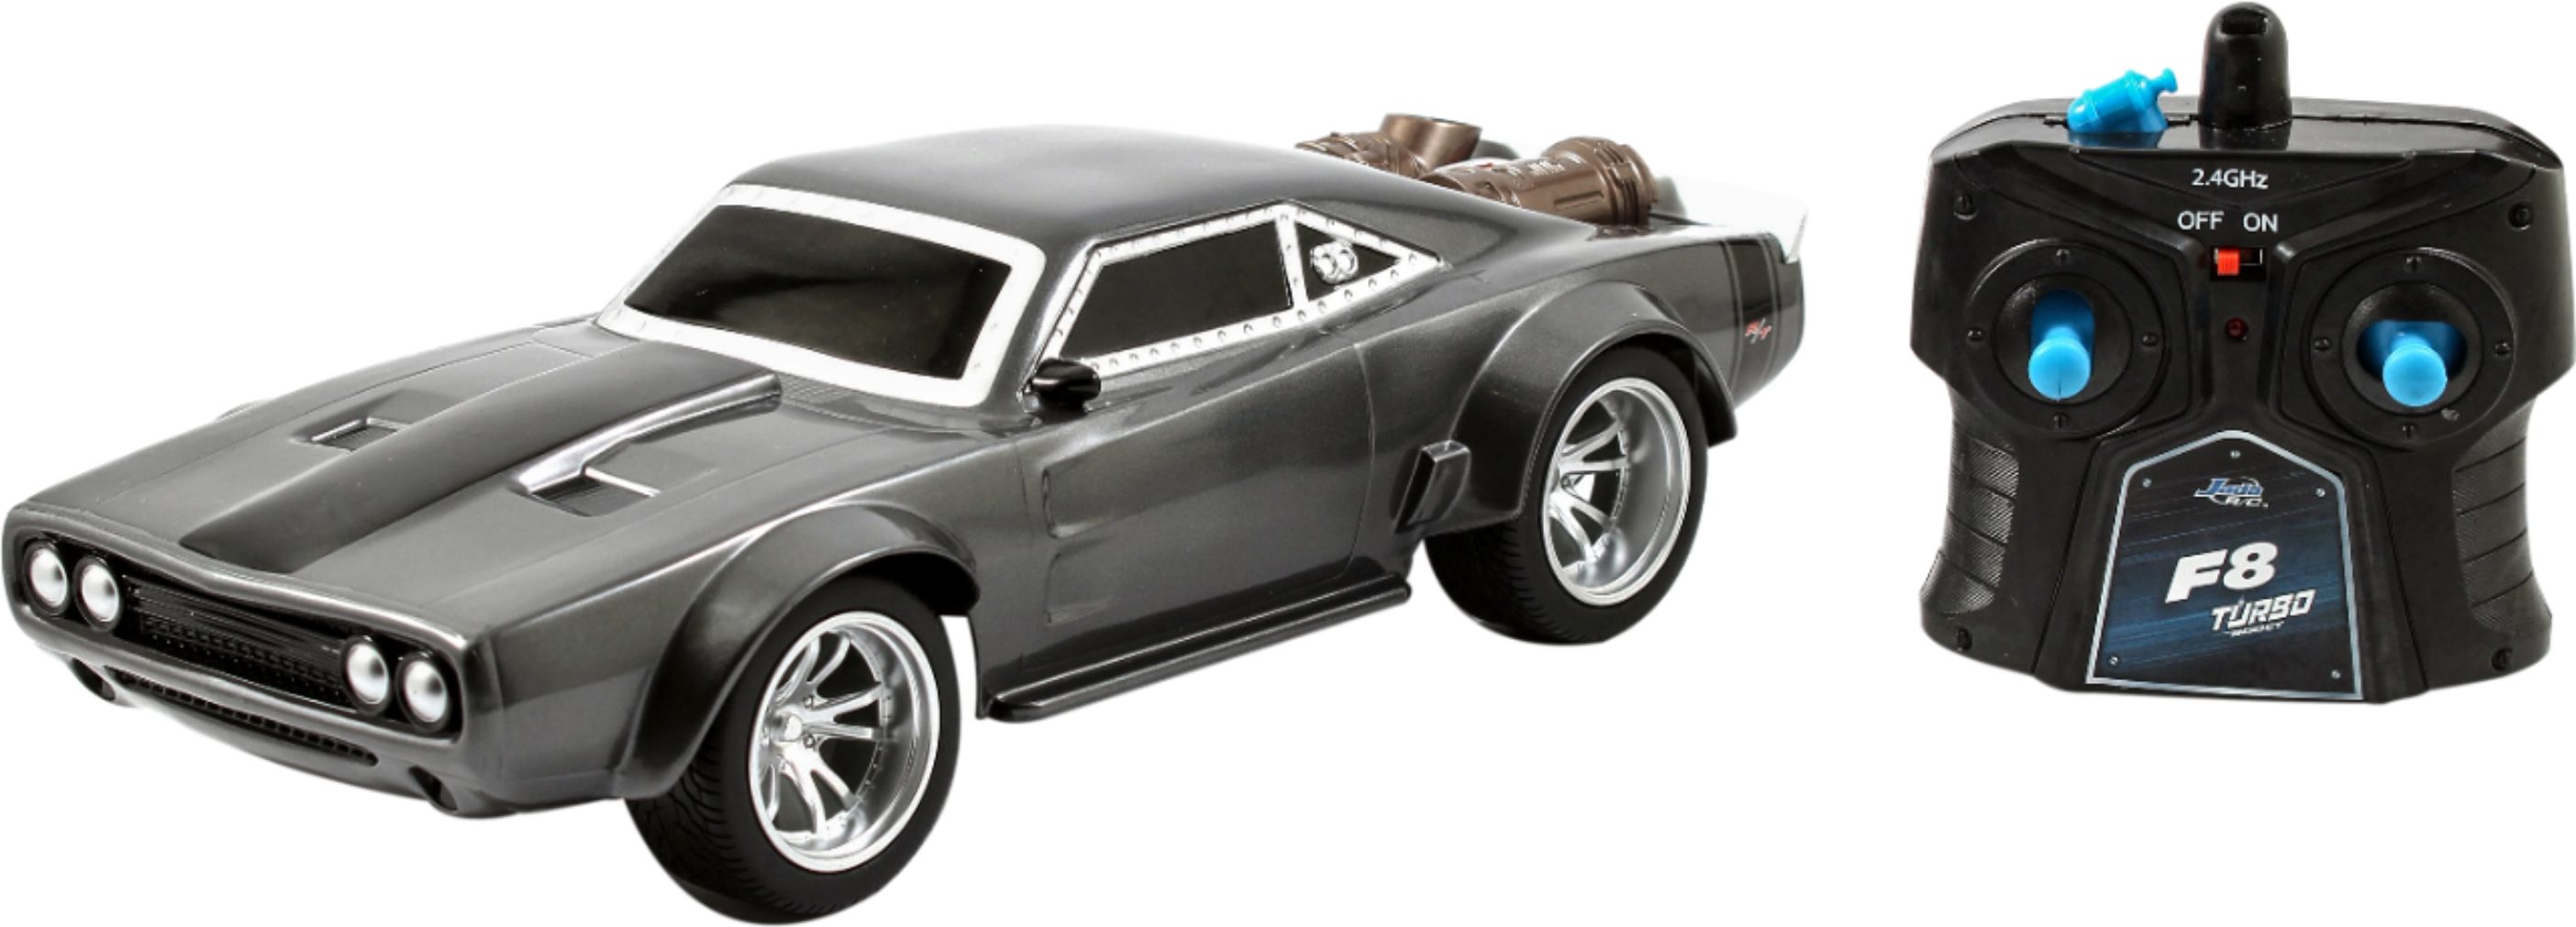 Best Buy: Jada Fast & Furious: Dom's Dodge Charger Remote Controlled Car  Black 84228